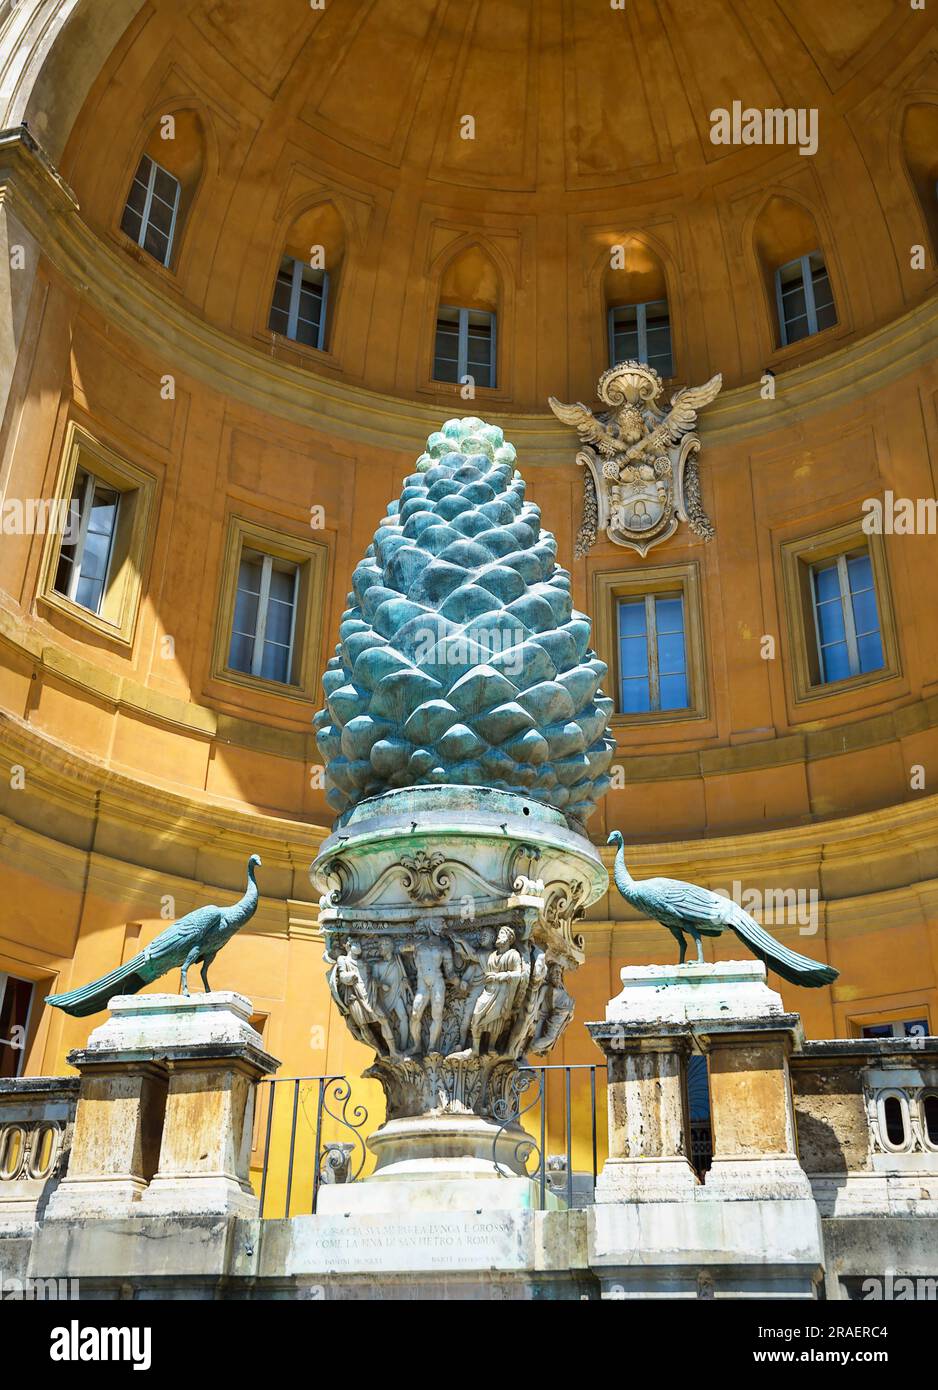 Cortile della Pigna or Pine Cone court in Vatican City, Rome, Italy. Vertical view of Renaissance architecture in Belvedere courtyard close-up. Theme Stock Photo